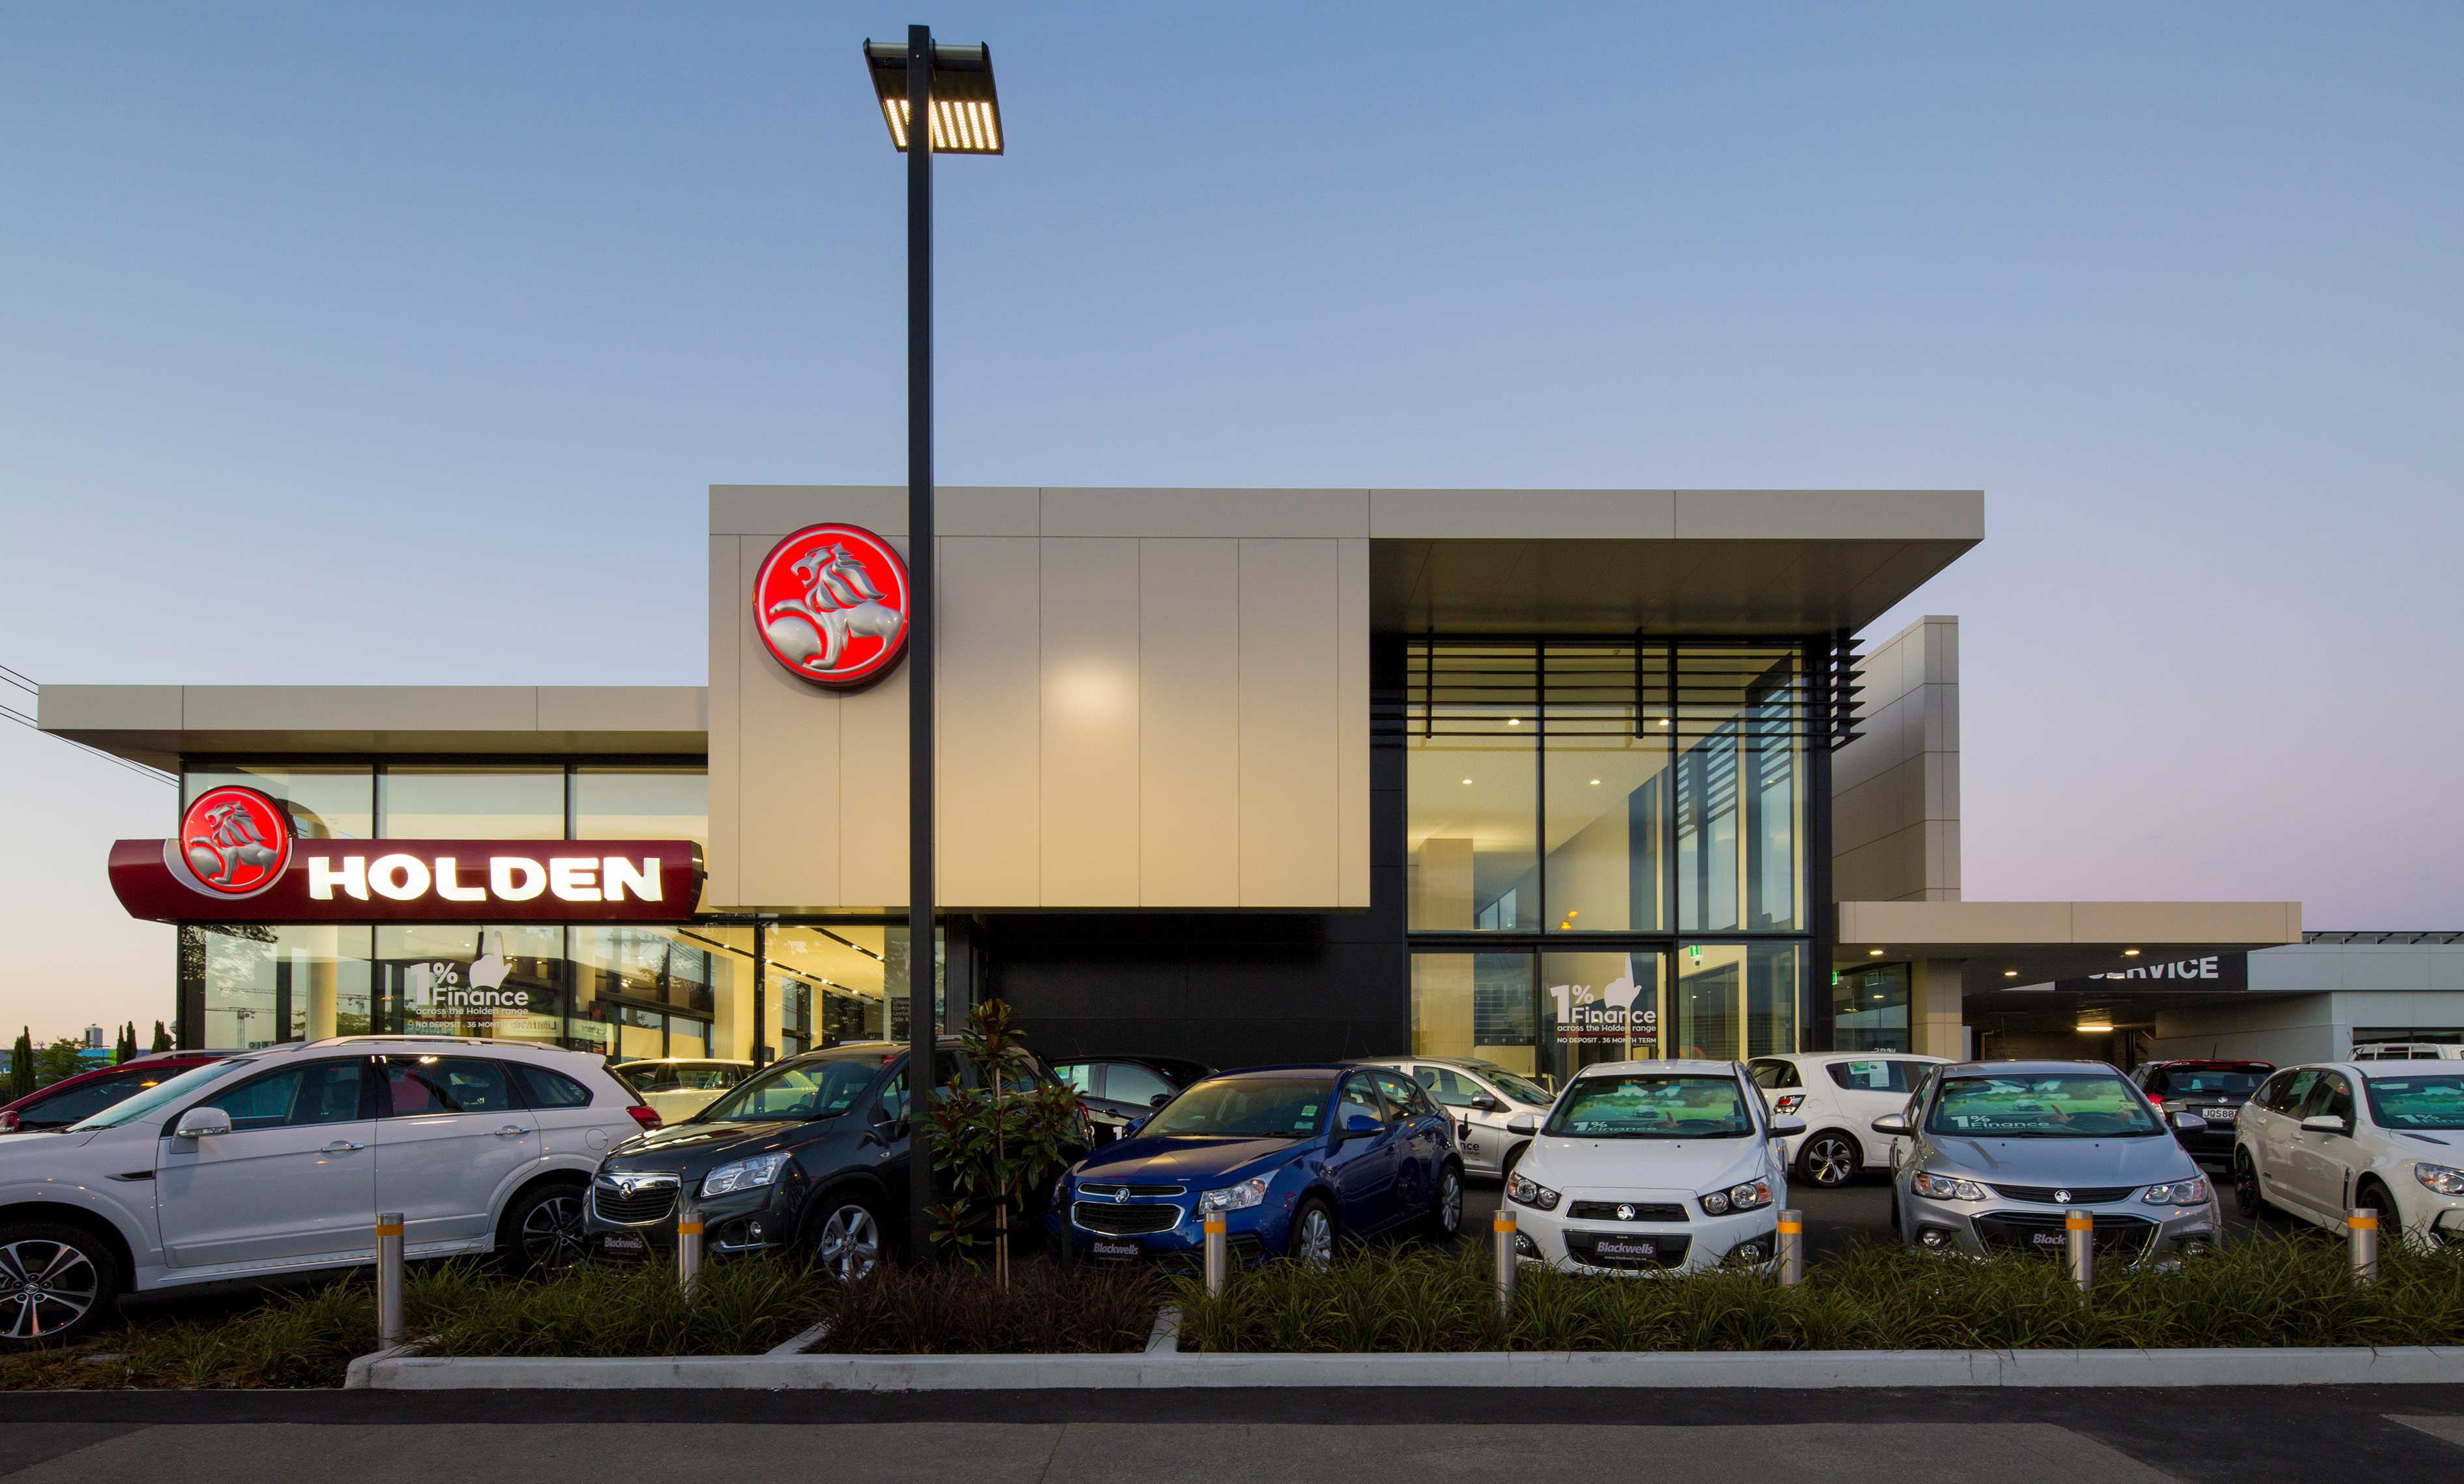 Blackwells Holden frontage at dusk with Holden cars in the foreground